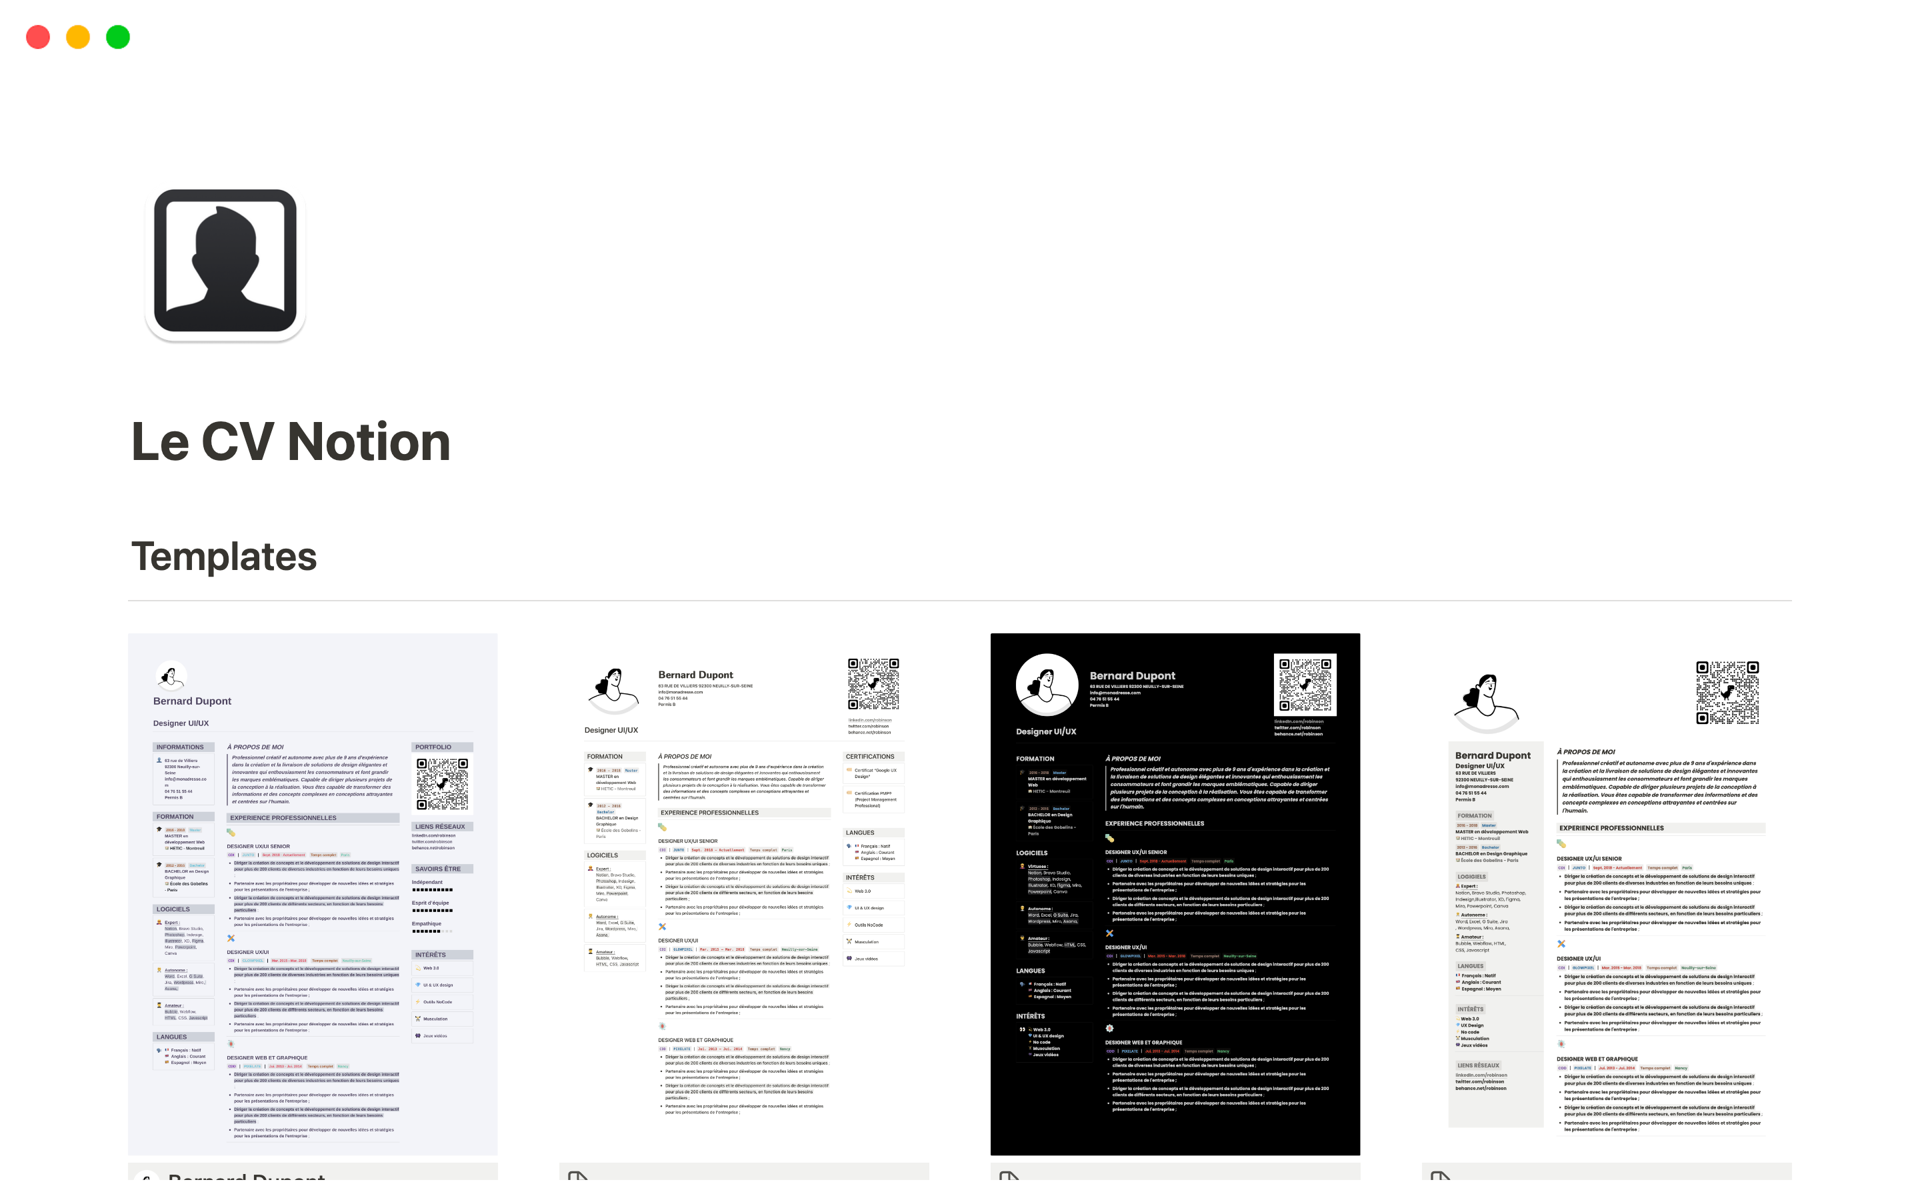 A template preview for Le CV Notion